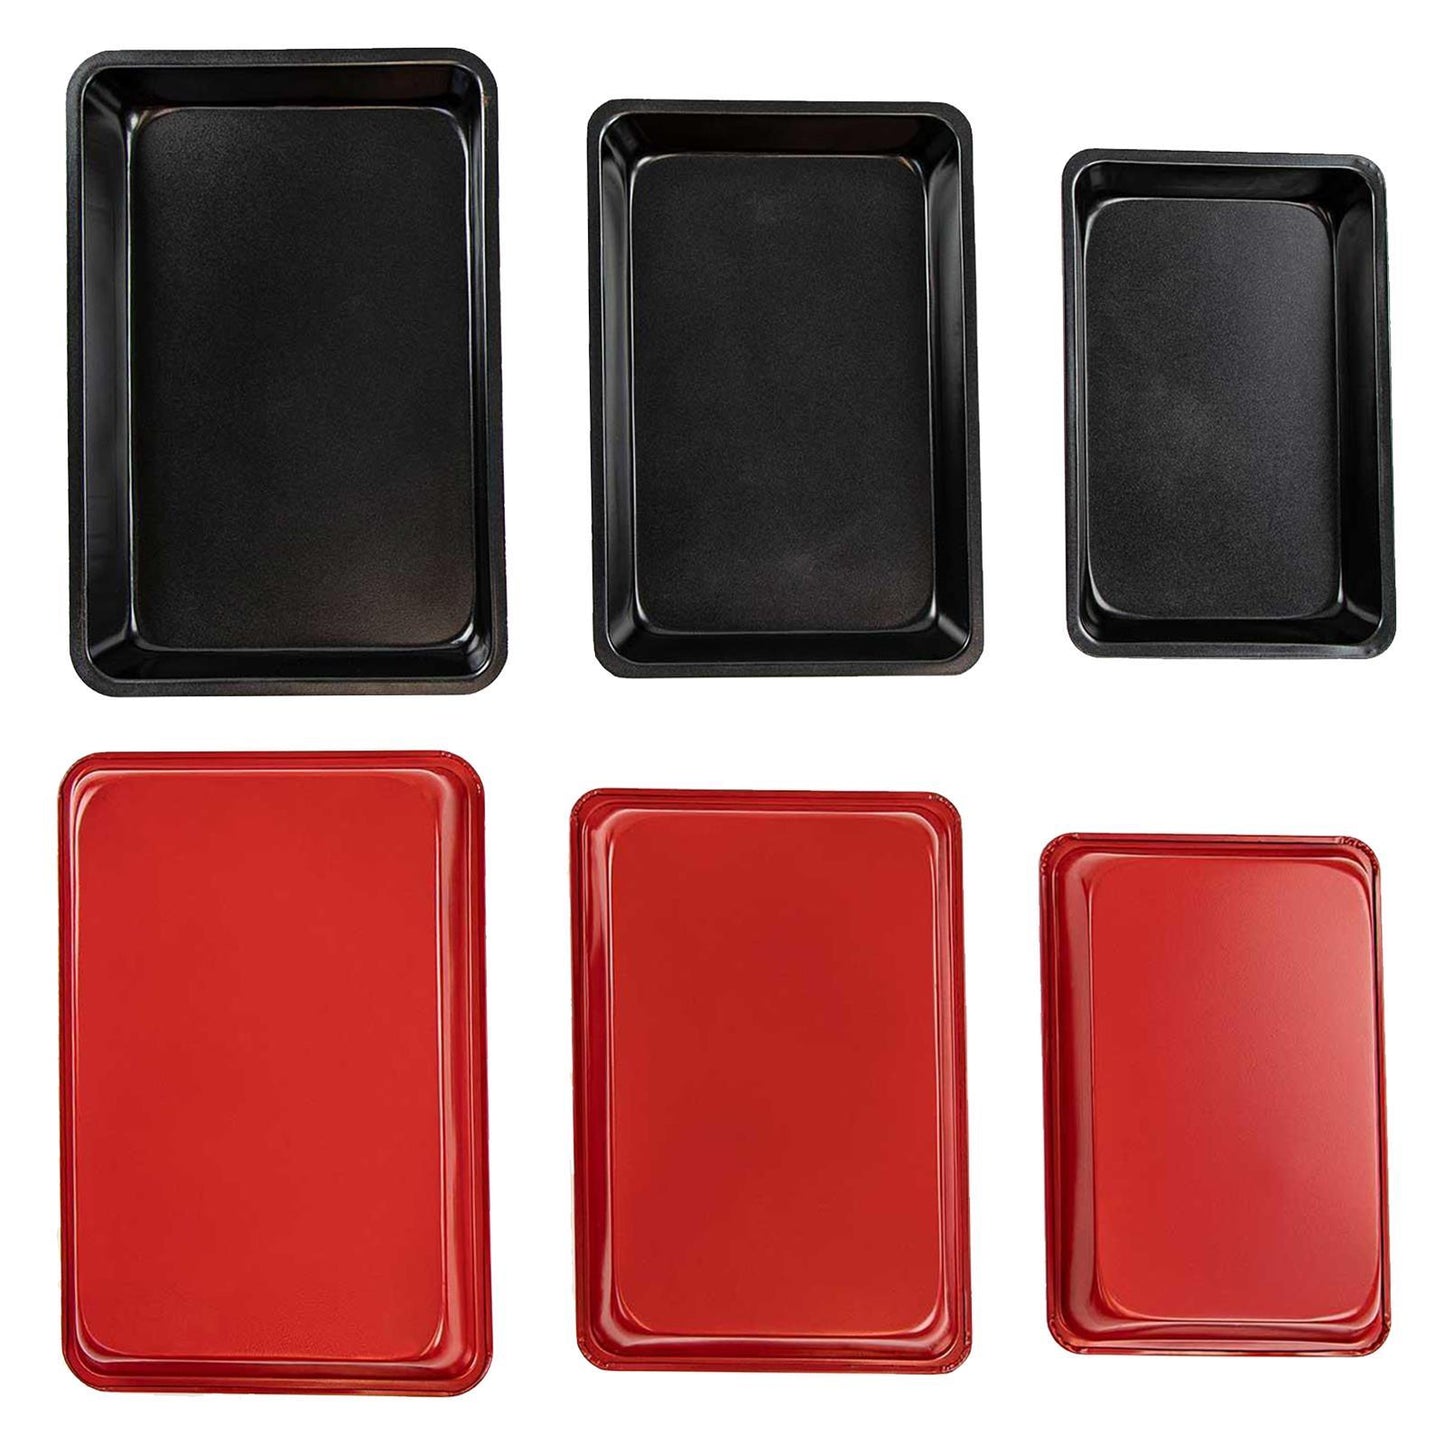 Oven-Safe Cooking Trays For Roasting And Baking With A Non-Stick Coating